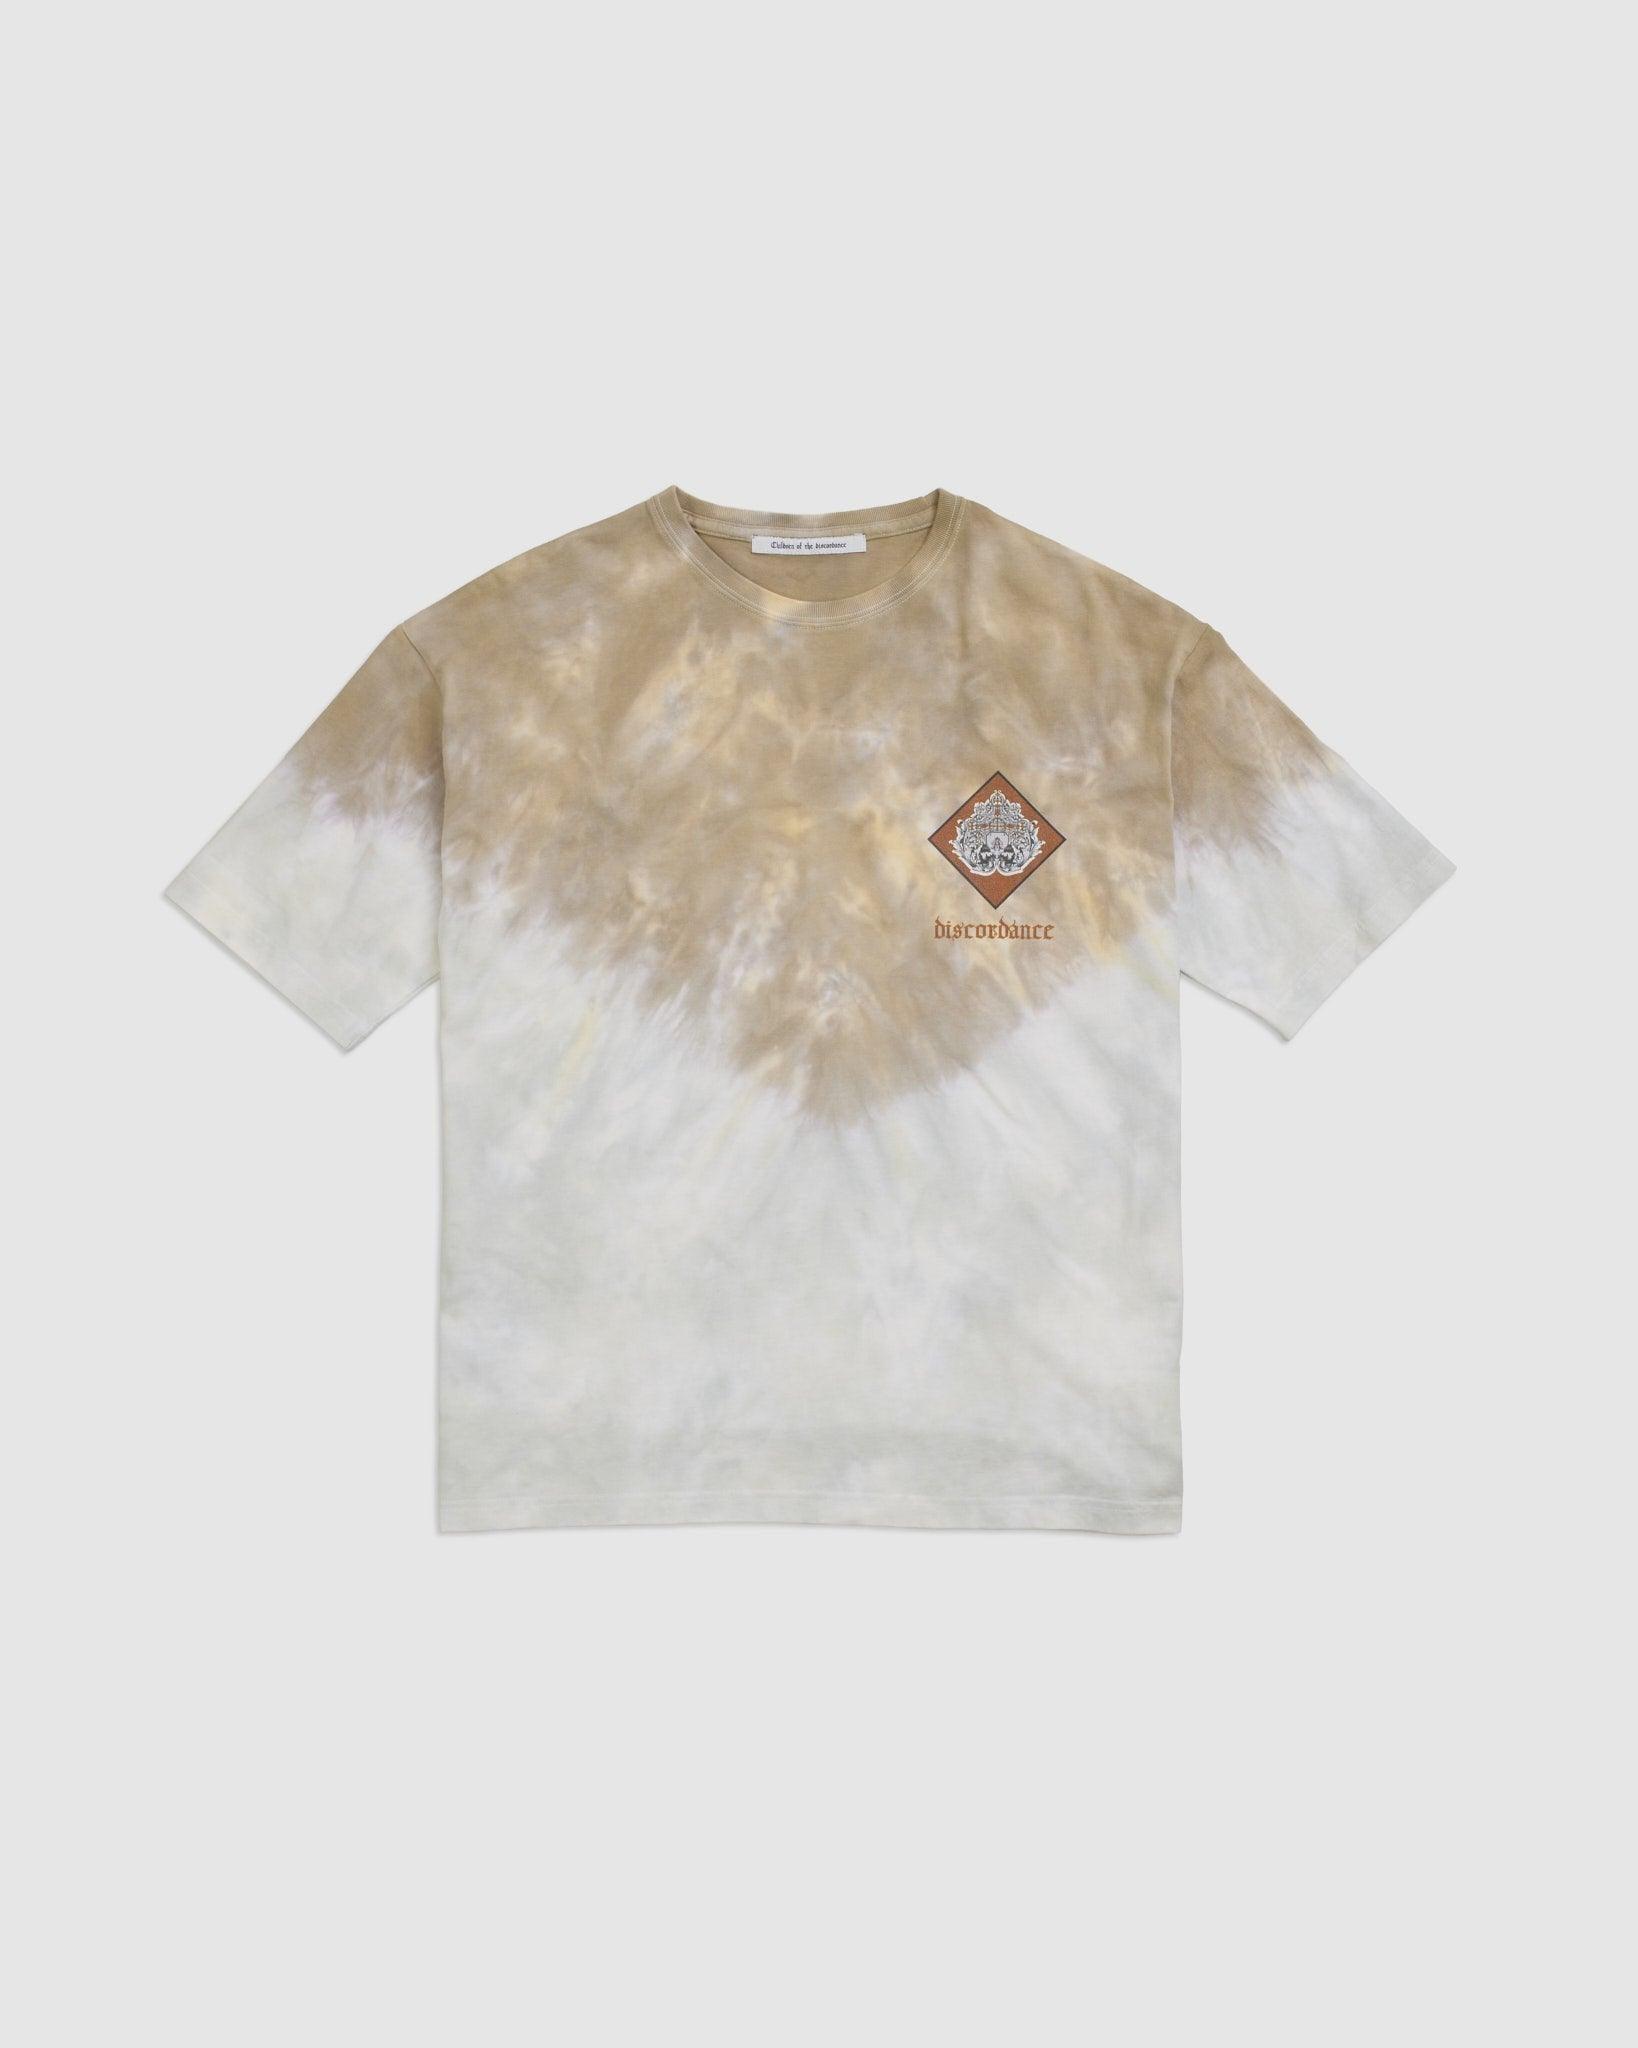 Hand Dye T-Shirt - {{ collection.title }} - Chinatown Country Club 